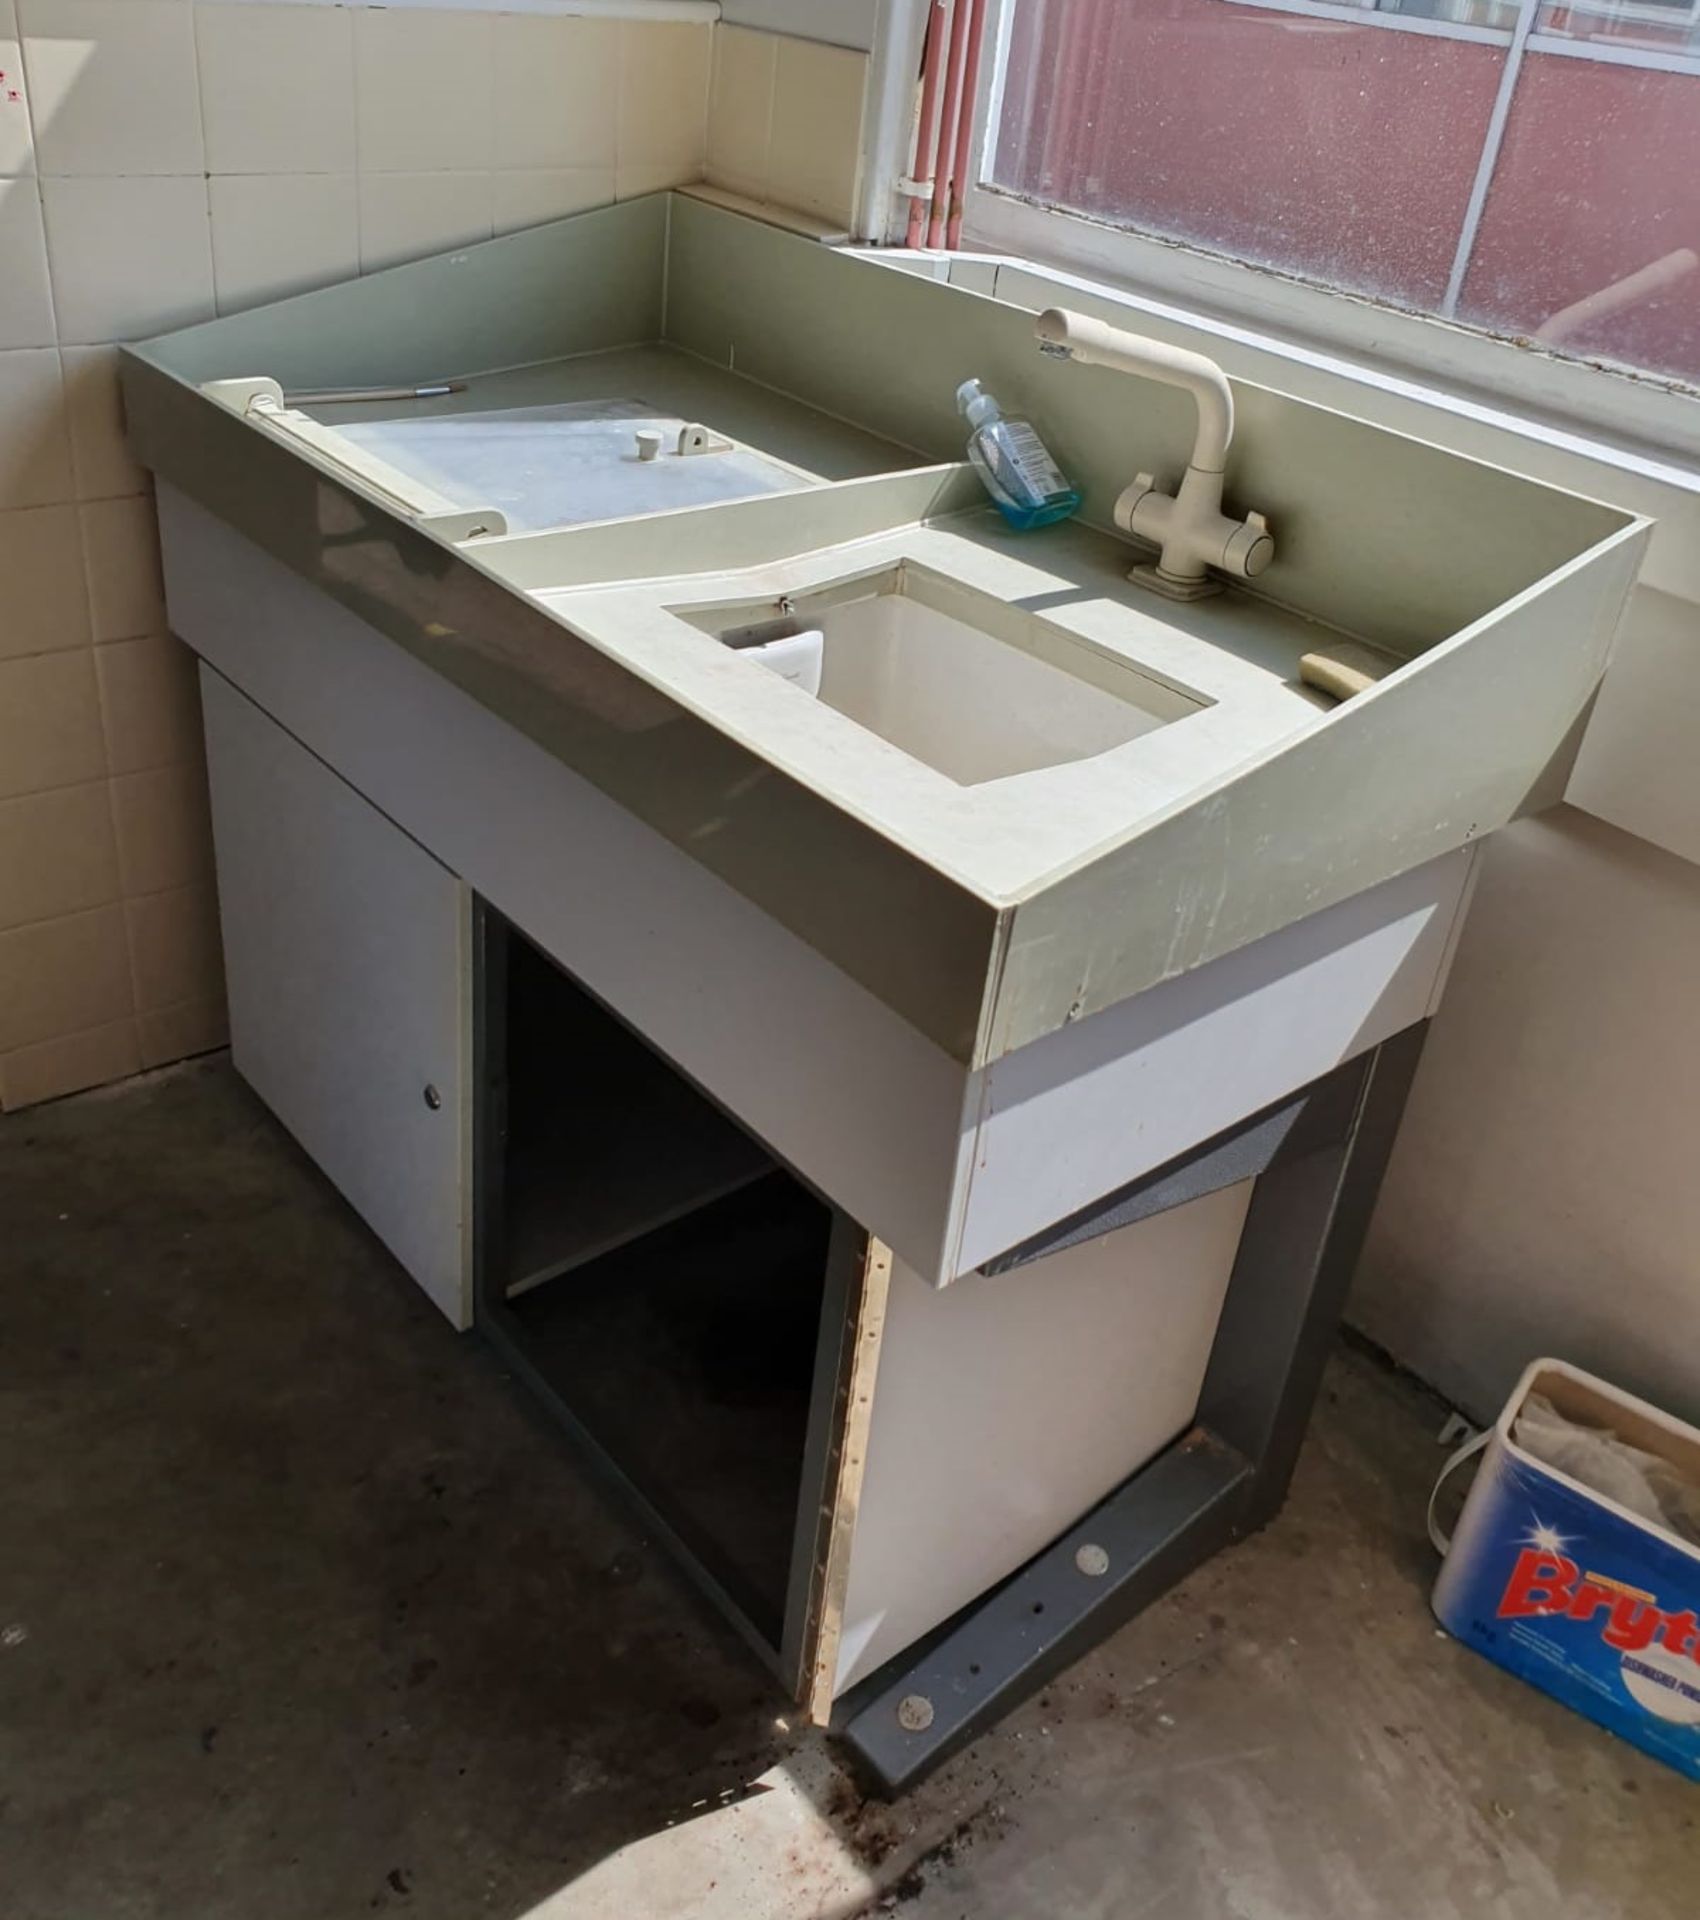 1 x Sink Basin With Anti Spash Sides, Steel Frame and Mixer Tap - CL499 - Location: Borehamwood - Image 2 of 3